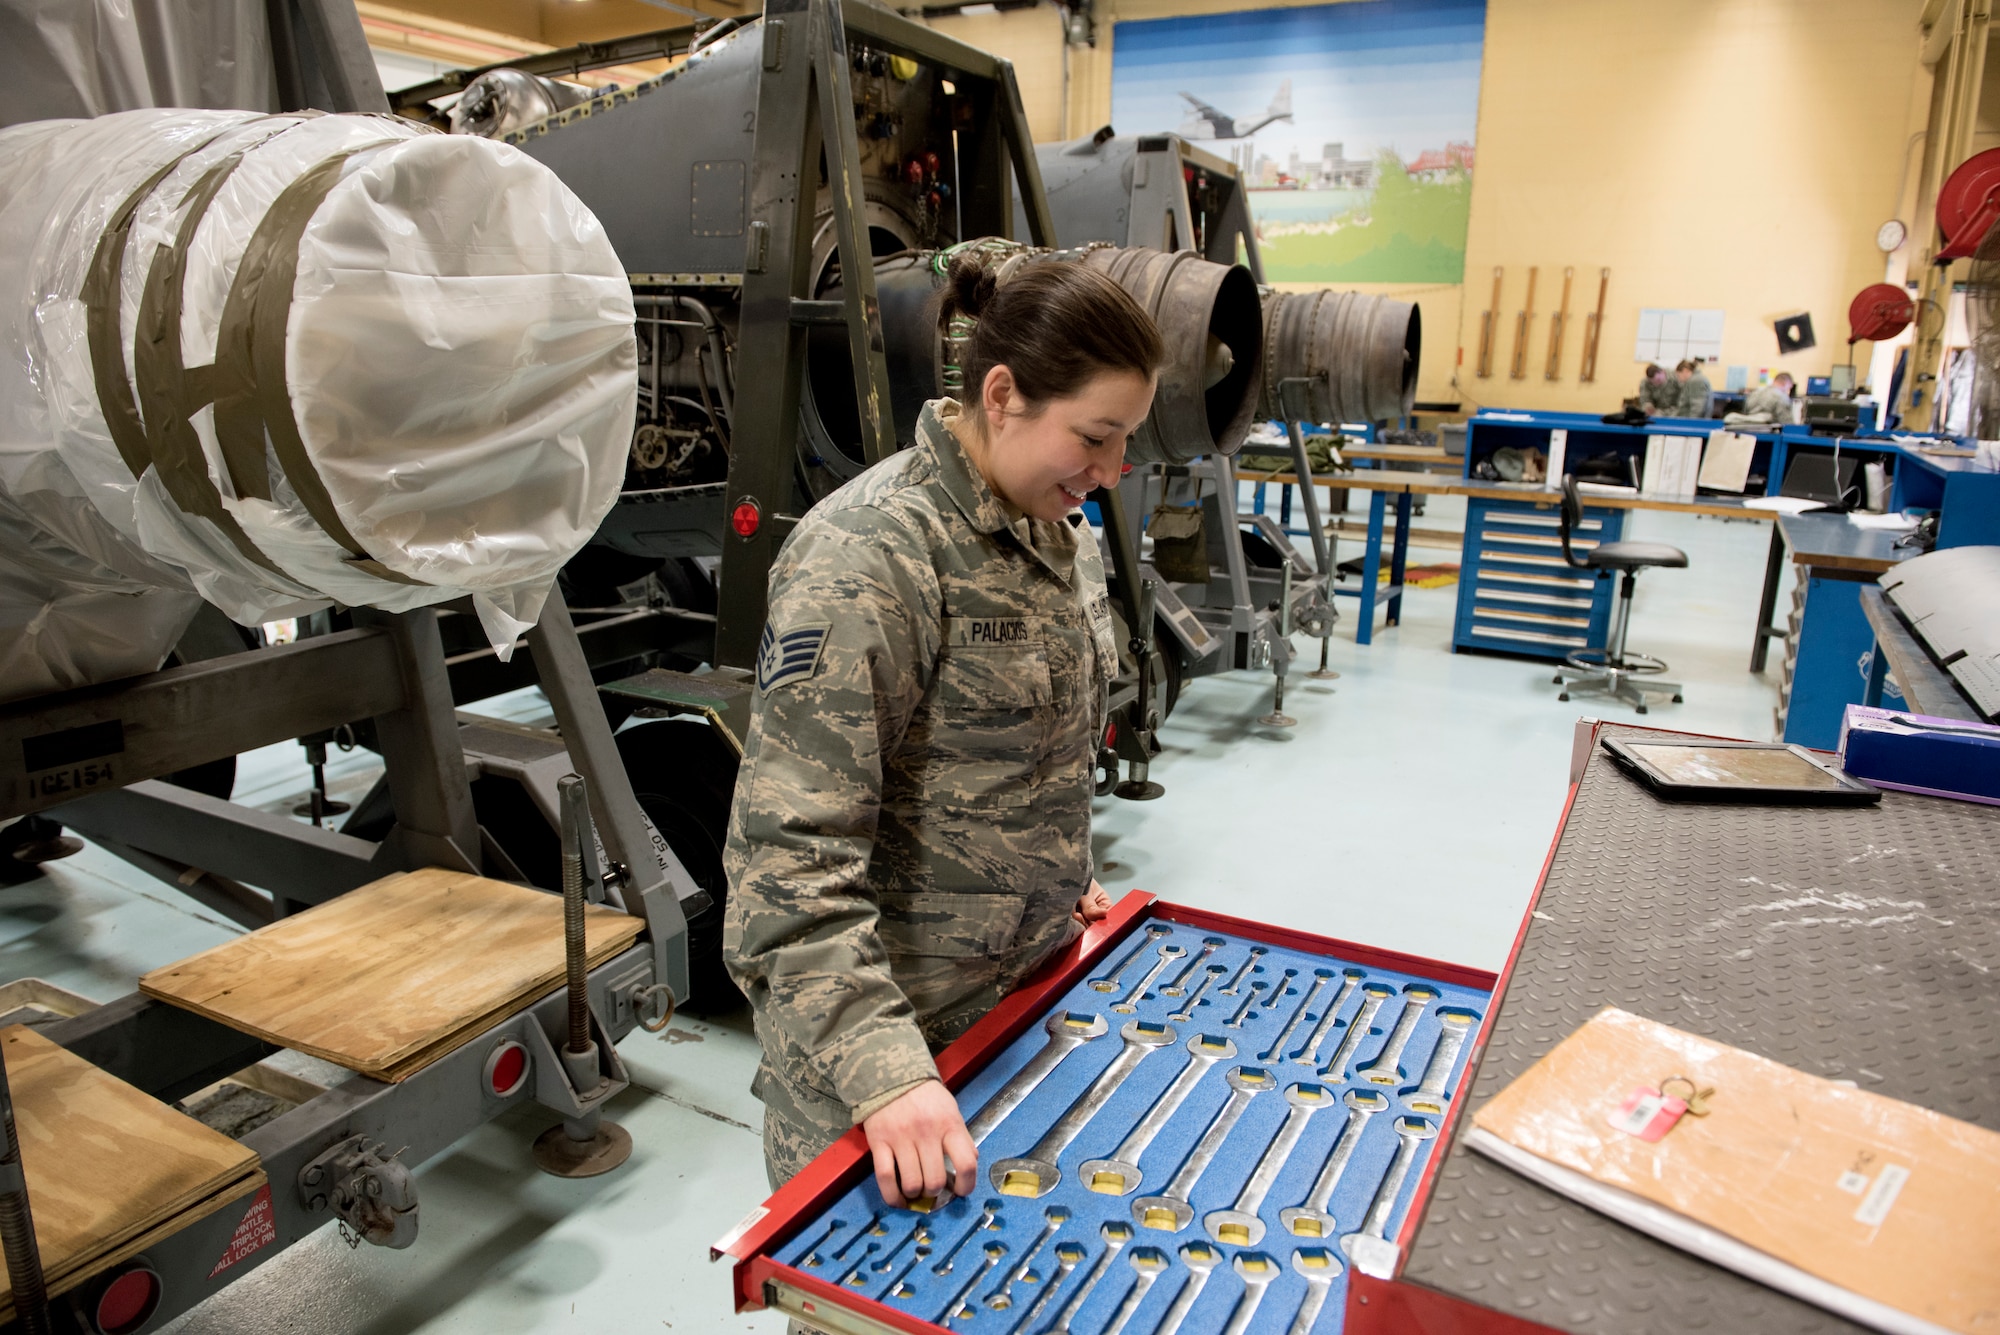 U.S. Air Force Staff Sgt. Samantha Palacios, an aerospace propulsion specialist at the 182nd Maintenance Squadron, Illinois Air National Guard, looks through a tool box in the machine shop at the 182nd Airlift Wing, Peoria, Ill., April 8, 2018.